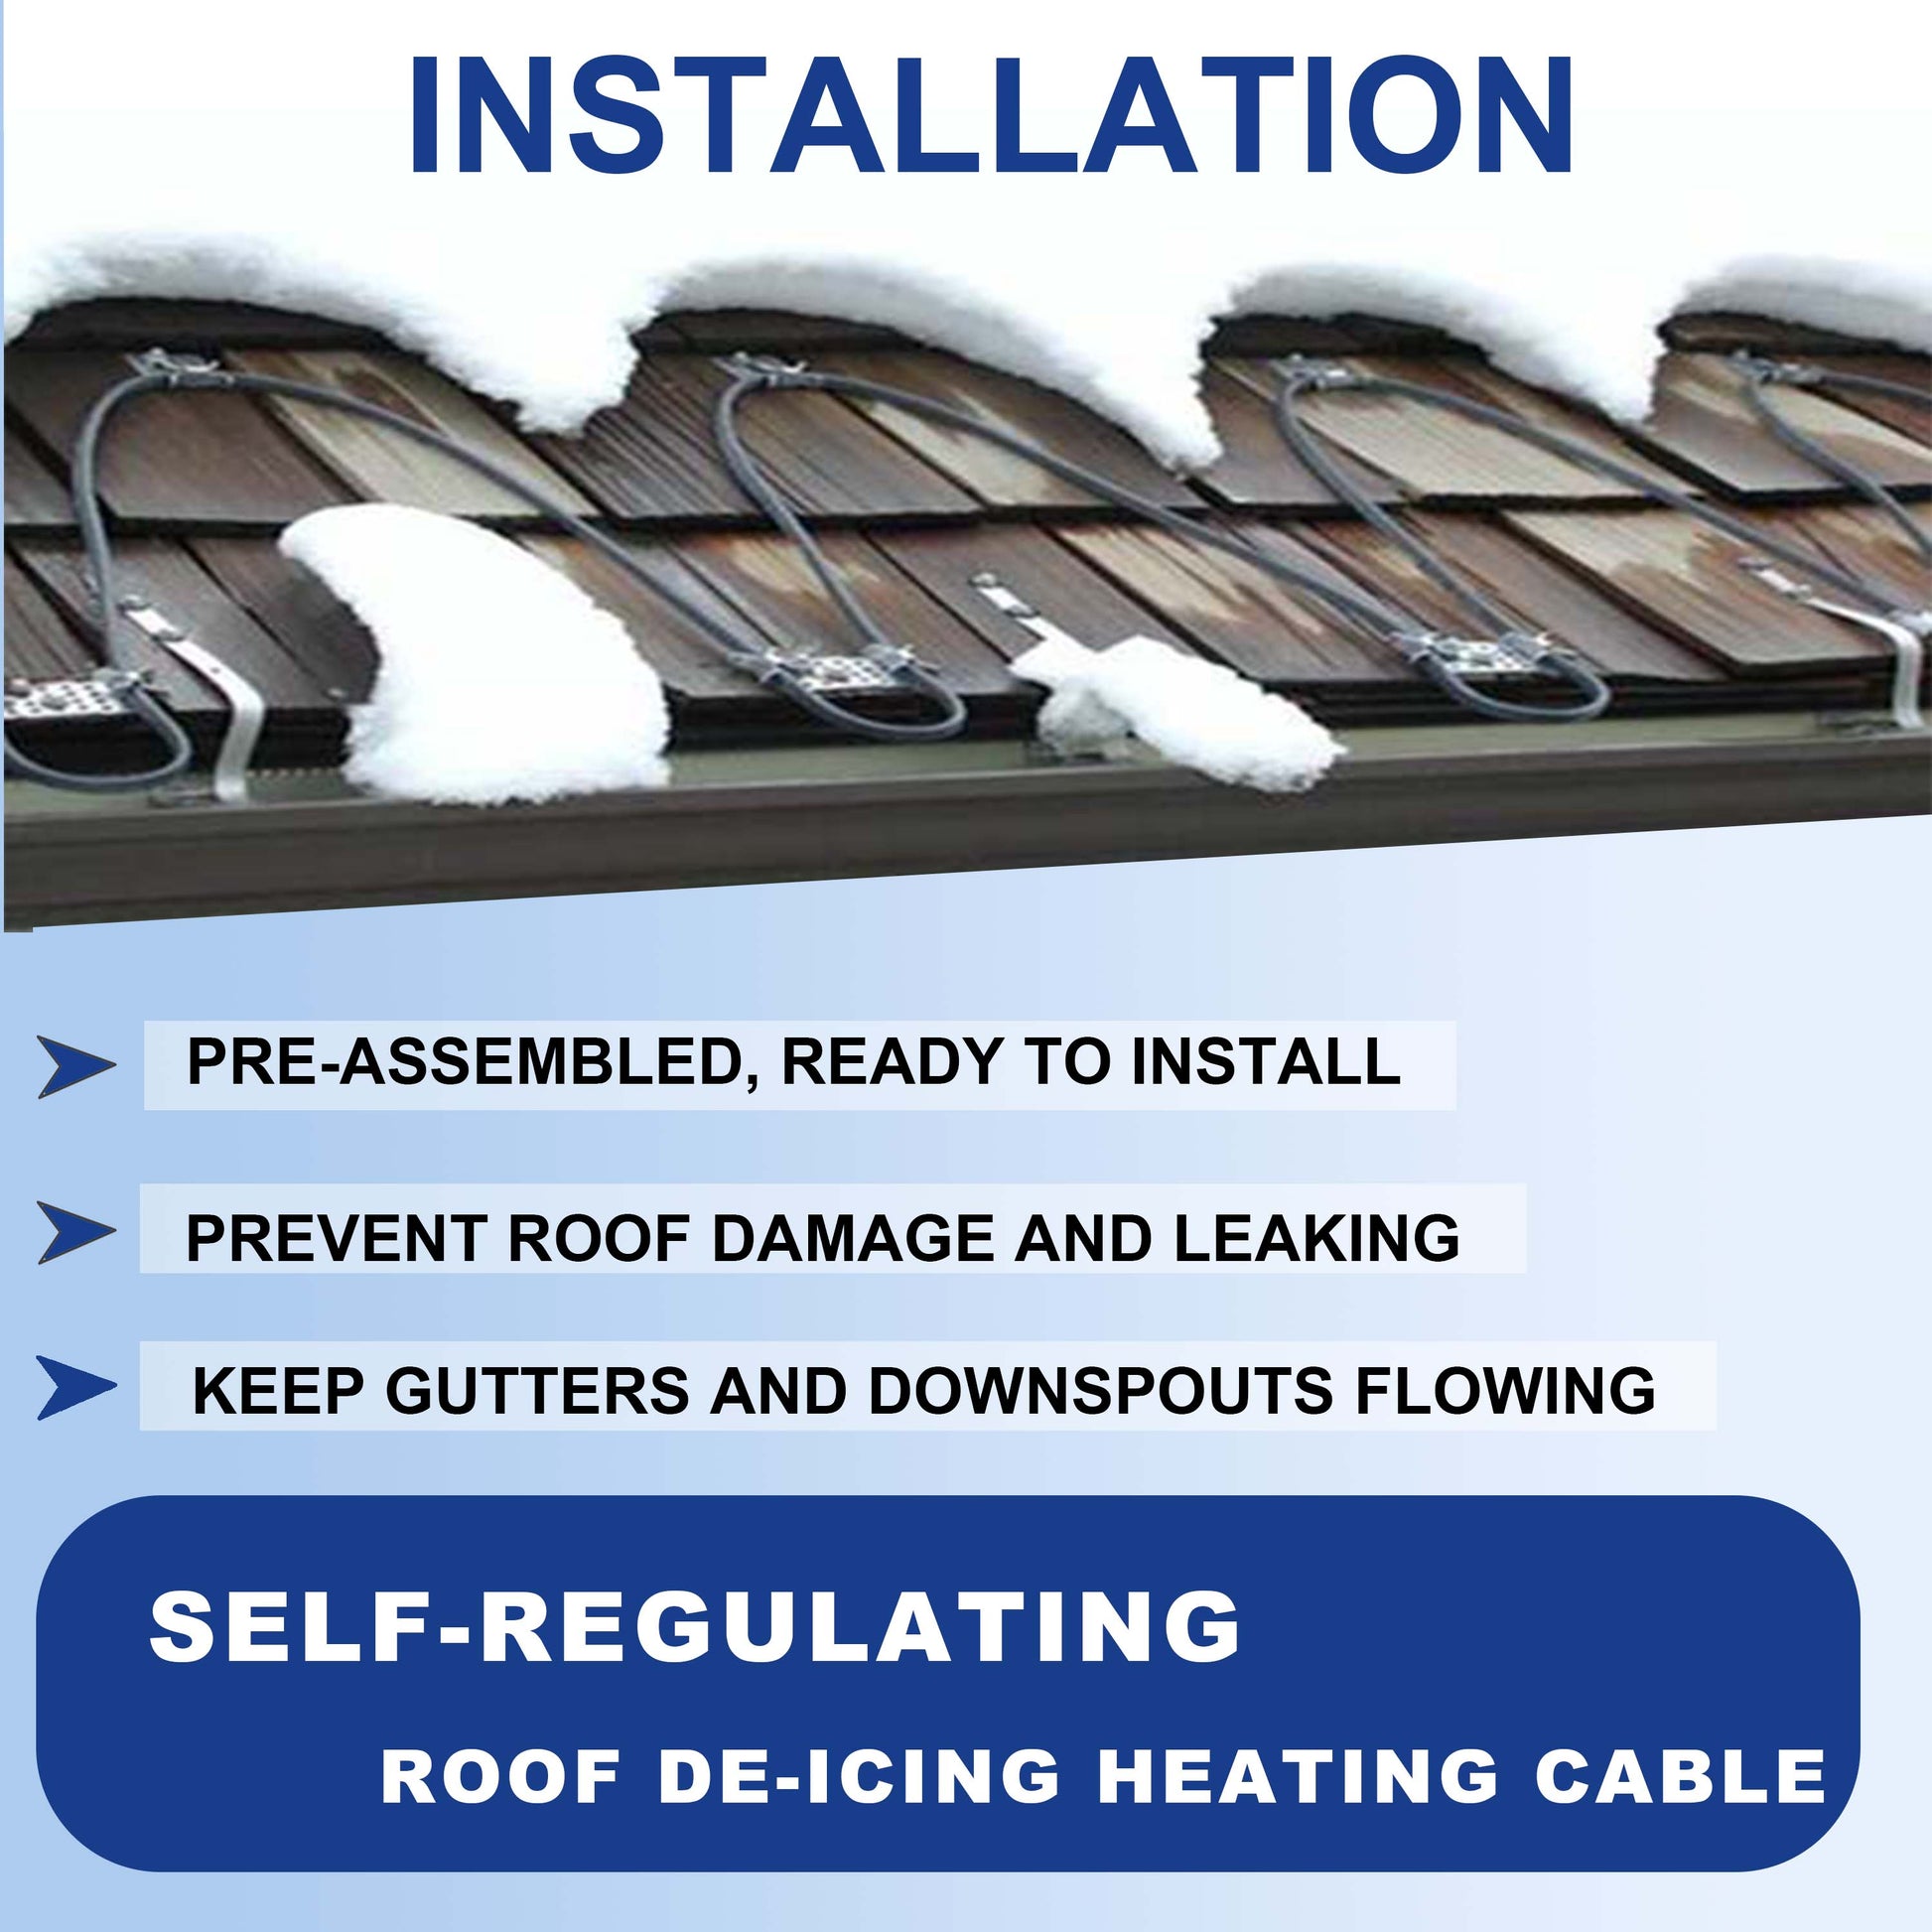 Roof De-Icing Heating Cable